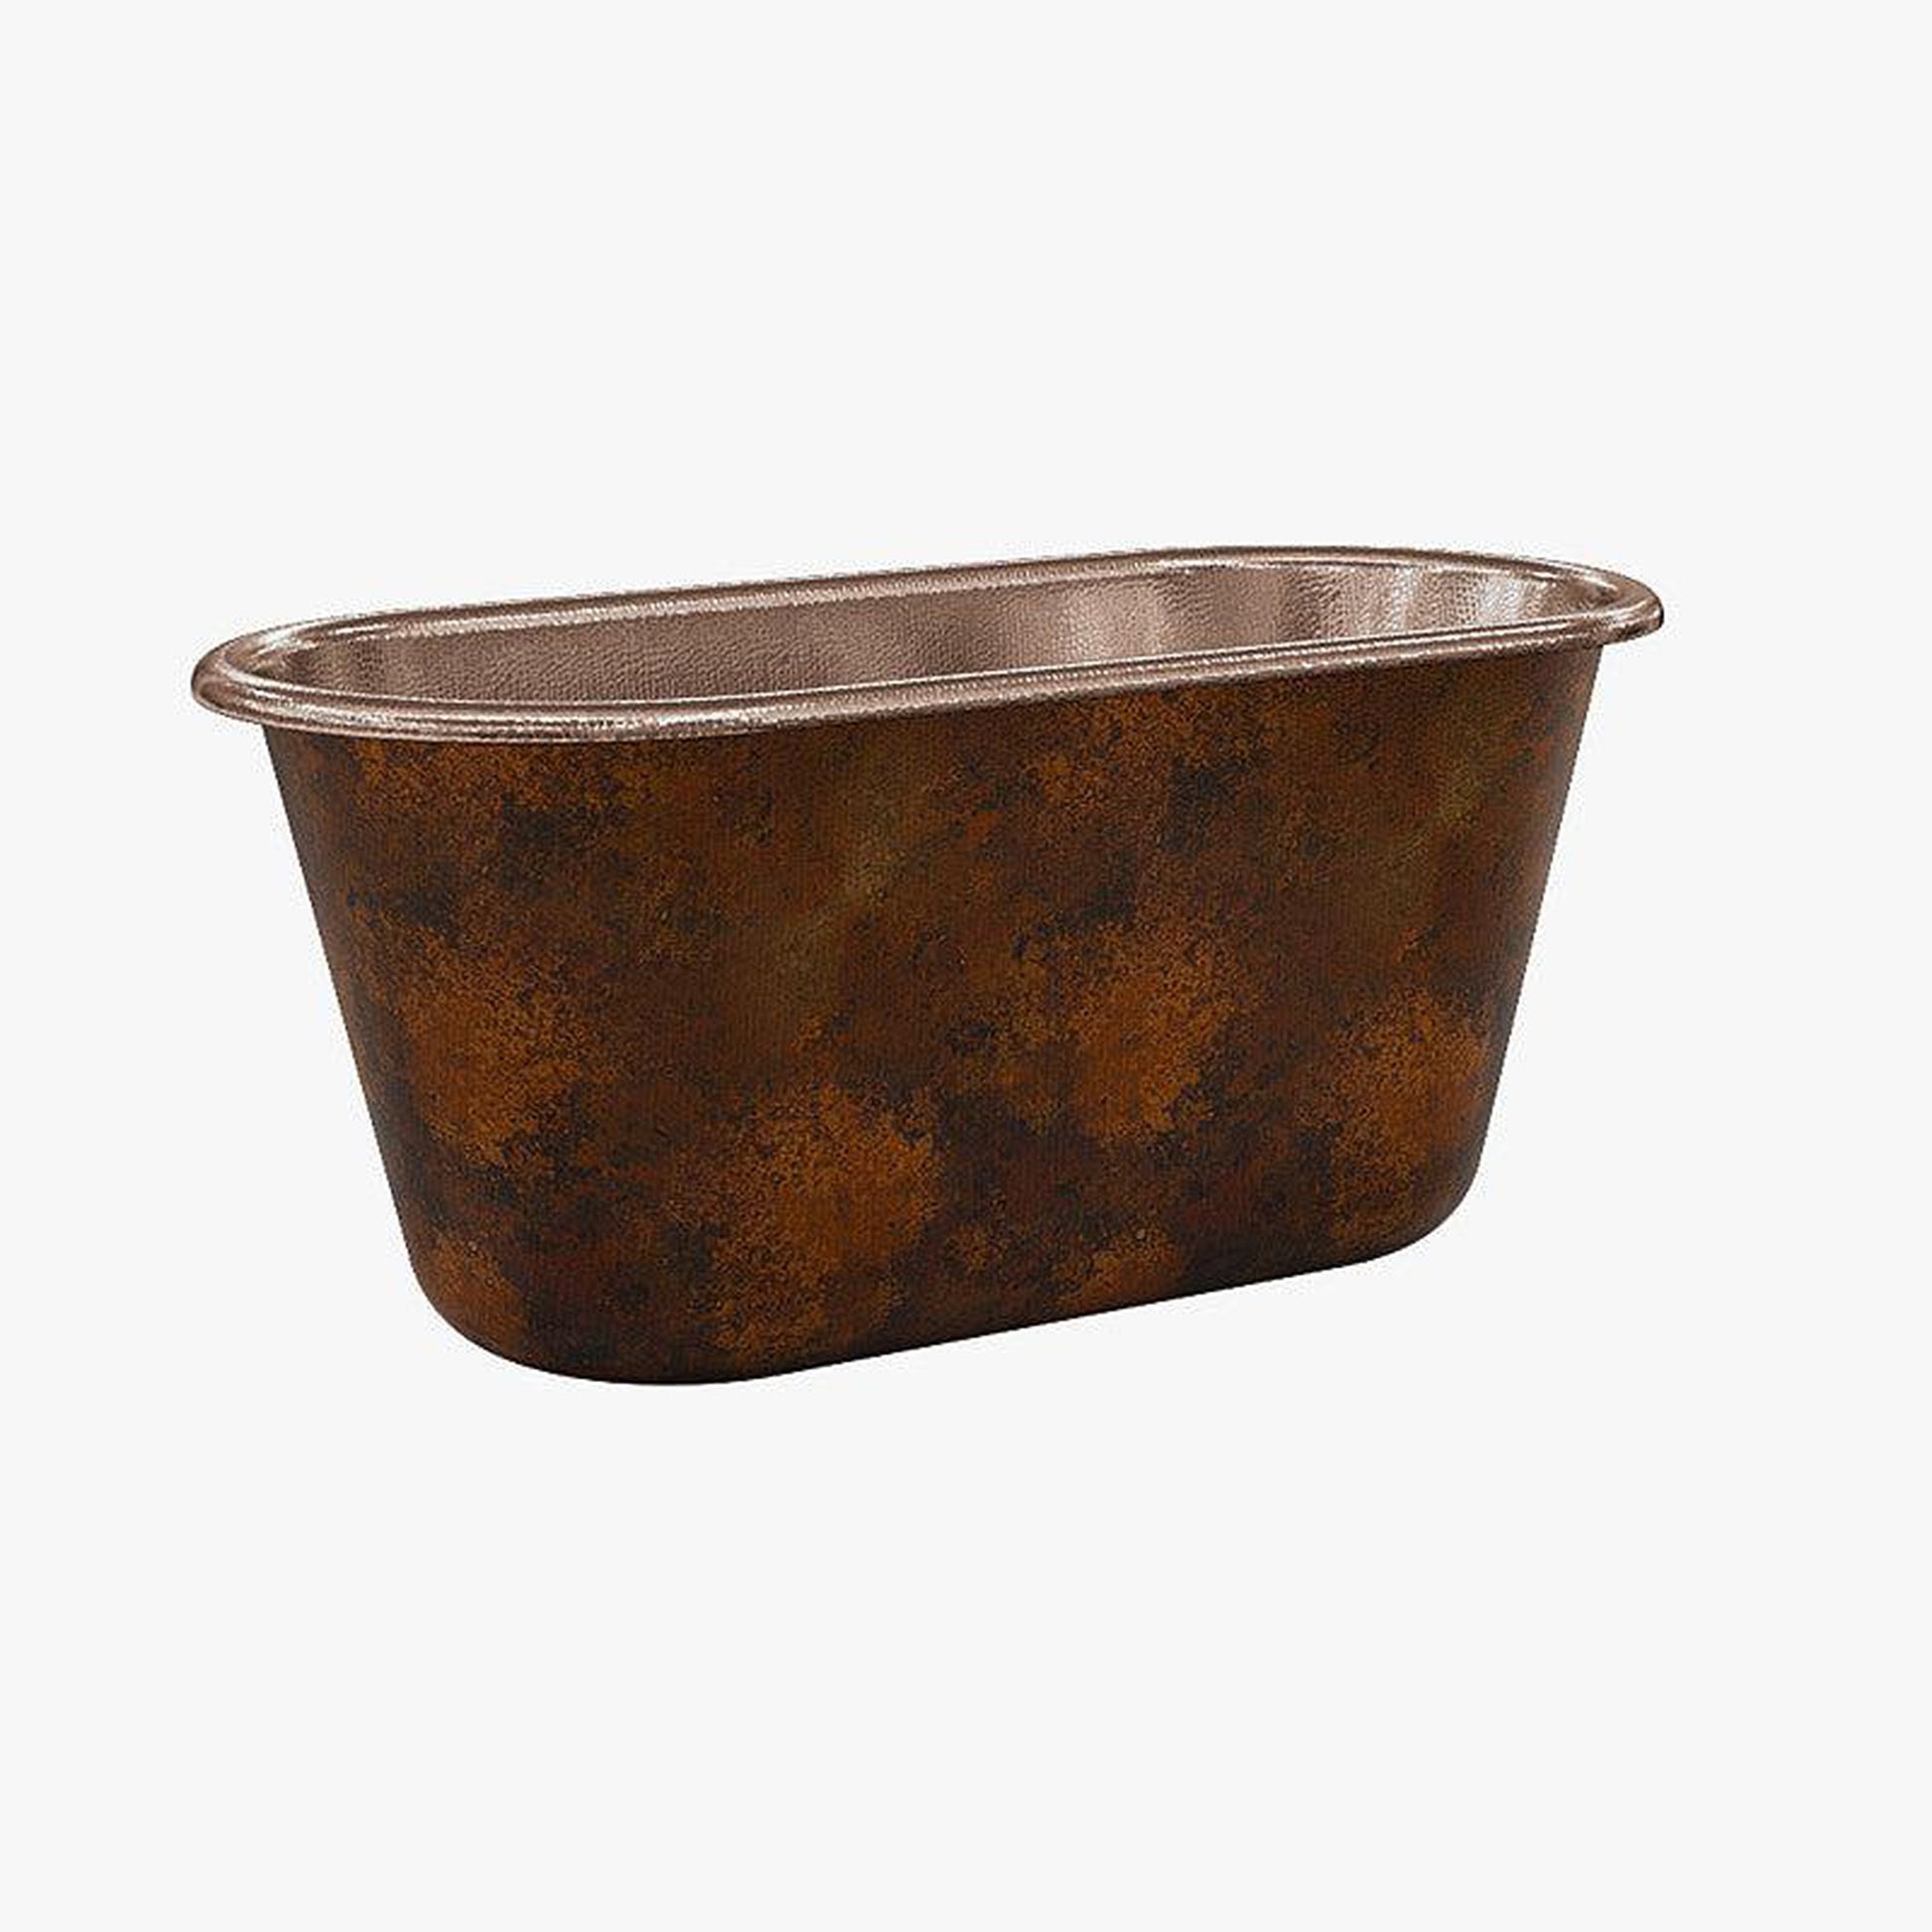 CopperSmith Heritage HX1 60" x 31" x 31" 16-Gauge Fire Copper Freestanding Bathtub With Polished Copper Interior and Oil Rubbed Bronze Lift & Turn Tub Drain and Polished Brass Tub Filler